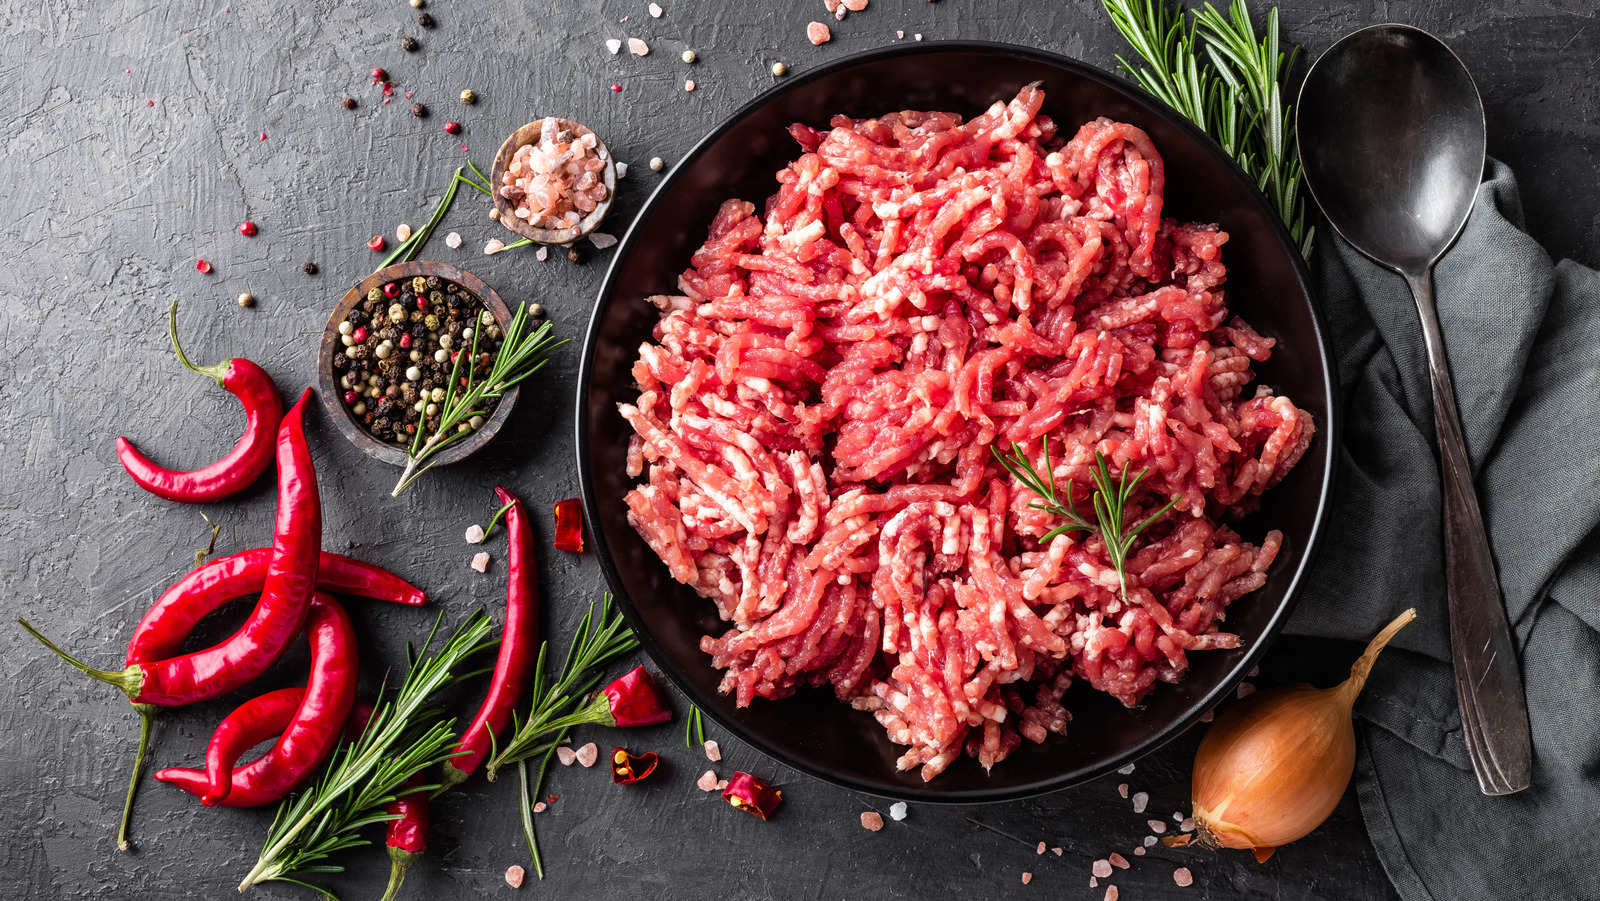 https://www.thedailymeal.com/img/gallery/seasonings-that-work-well-with-ground-beef/l-intro-1674330573.jpg